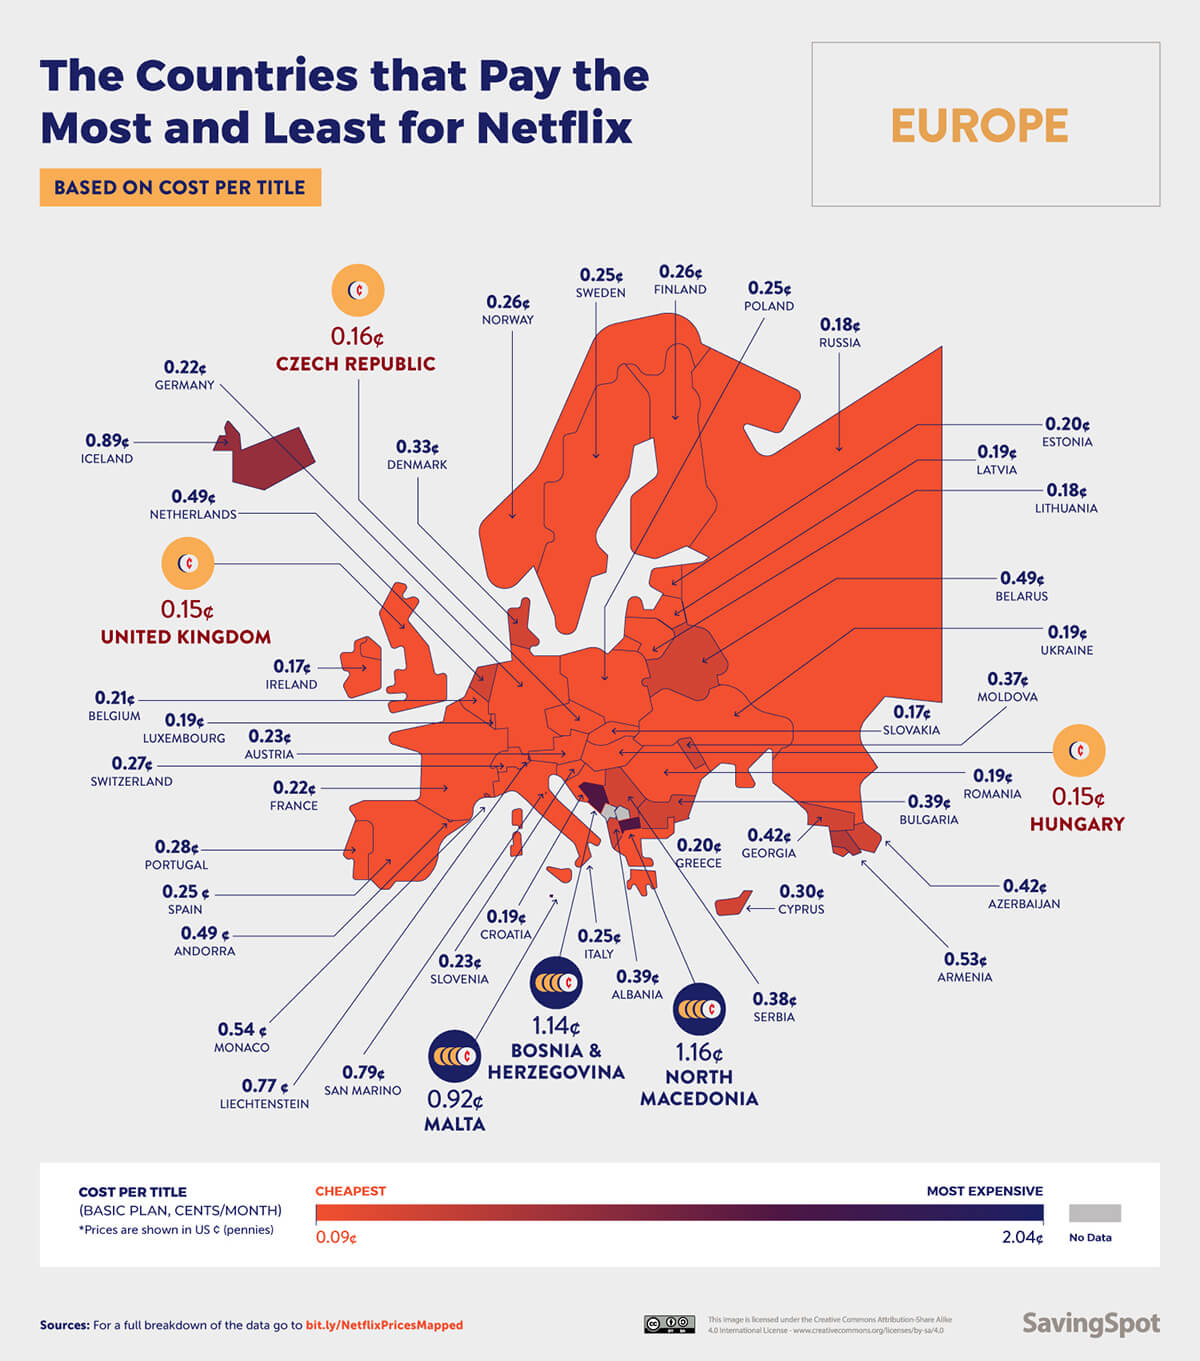 The Cost-per-title of Netflix in Europe